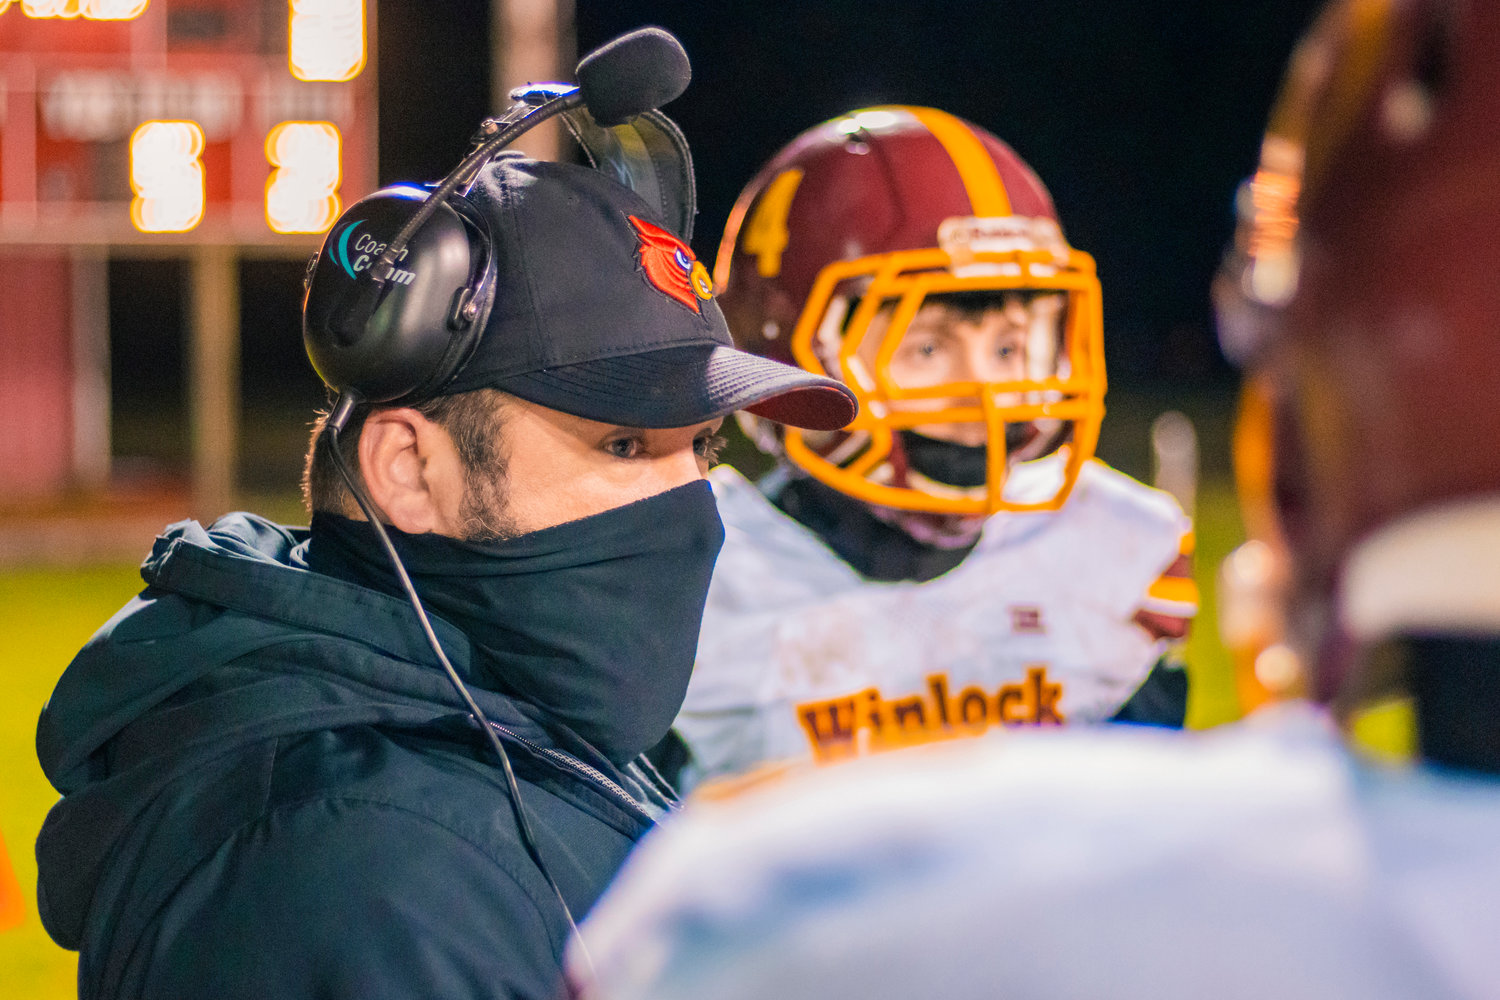 Cardinals’ Head Coach talks to players during a game against the Vikings Friday night in Mossyrock.